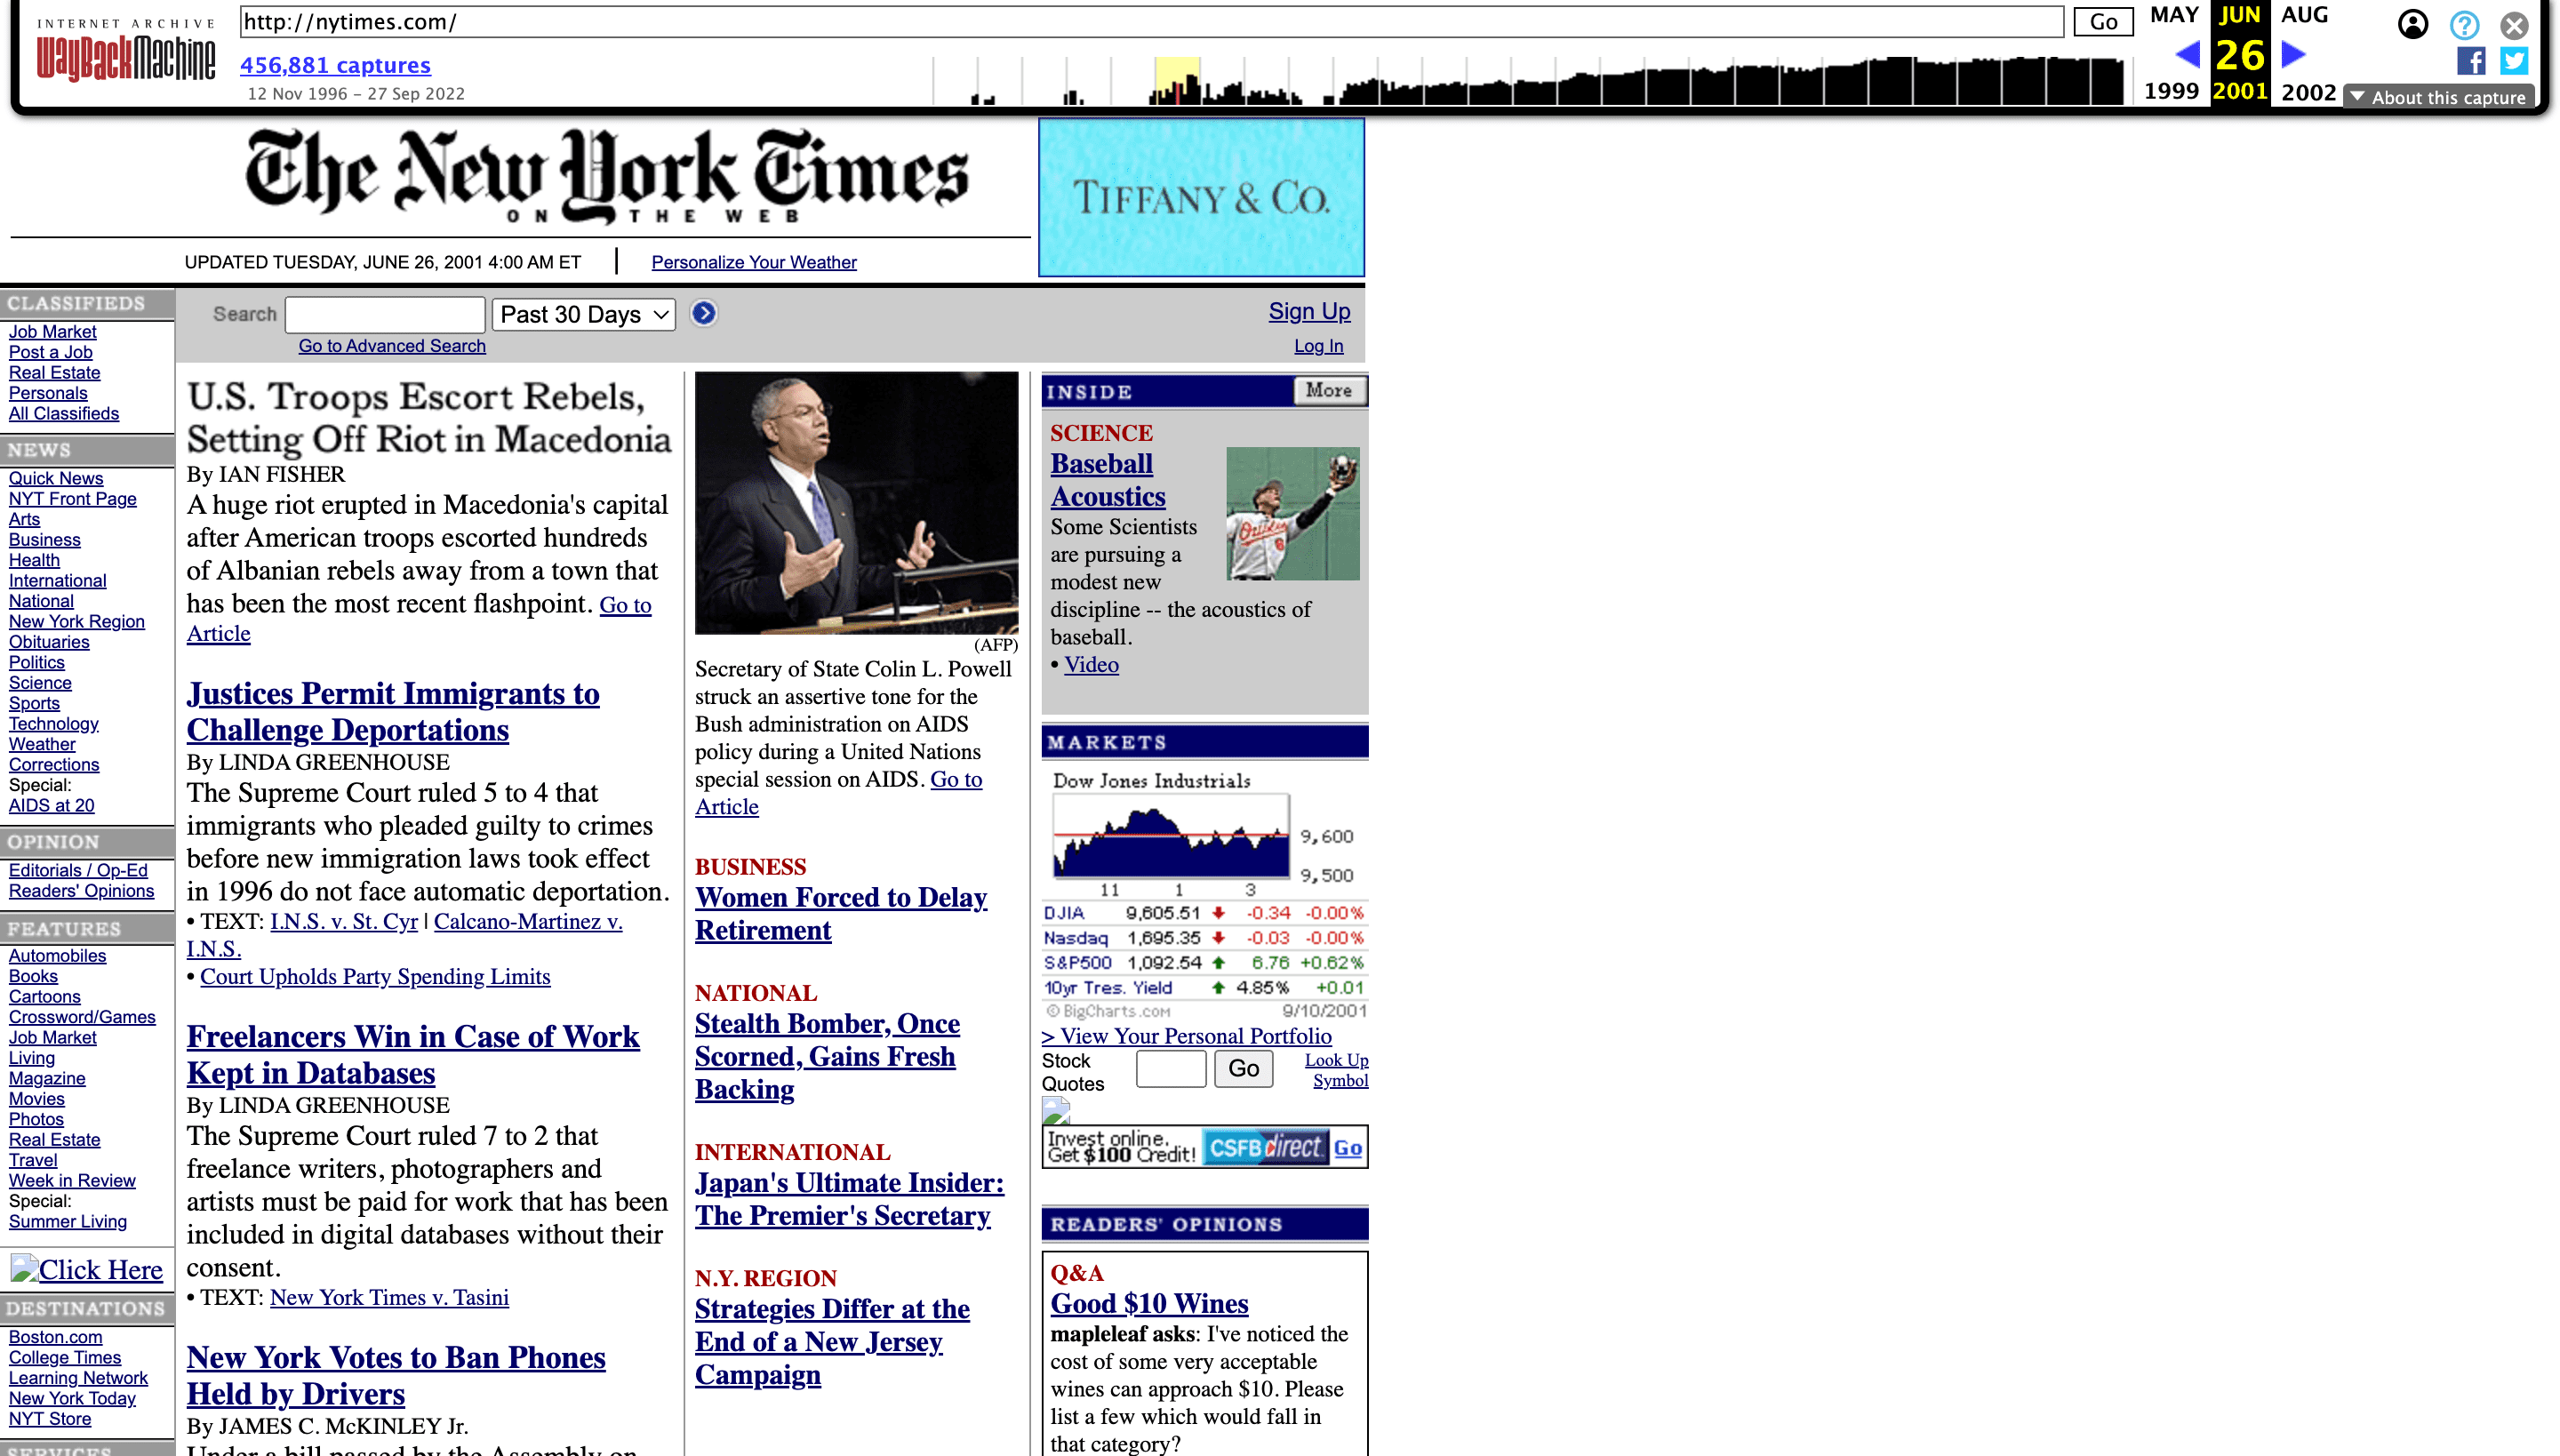 webarchive nytimes in 2001